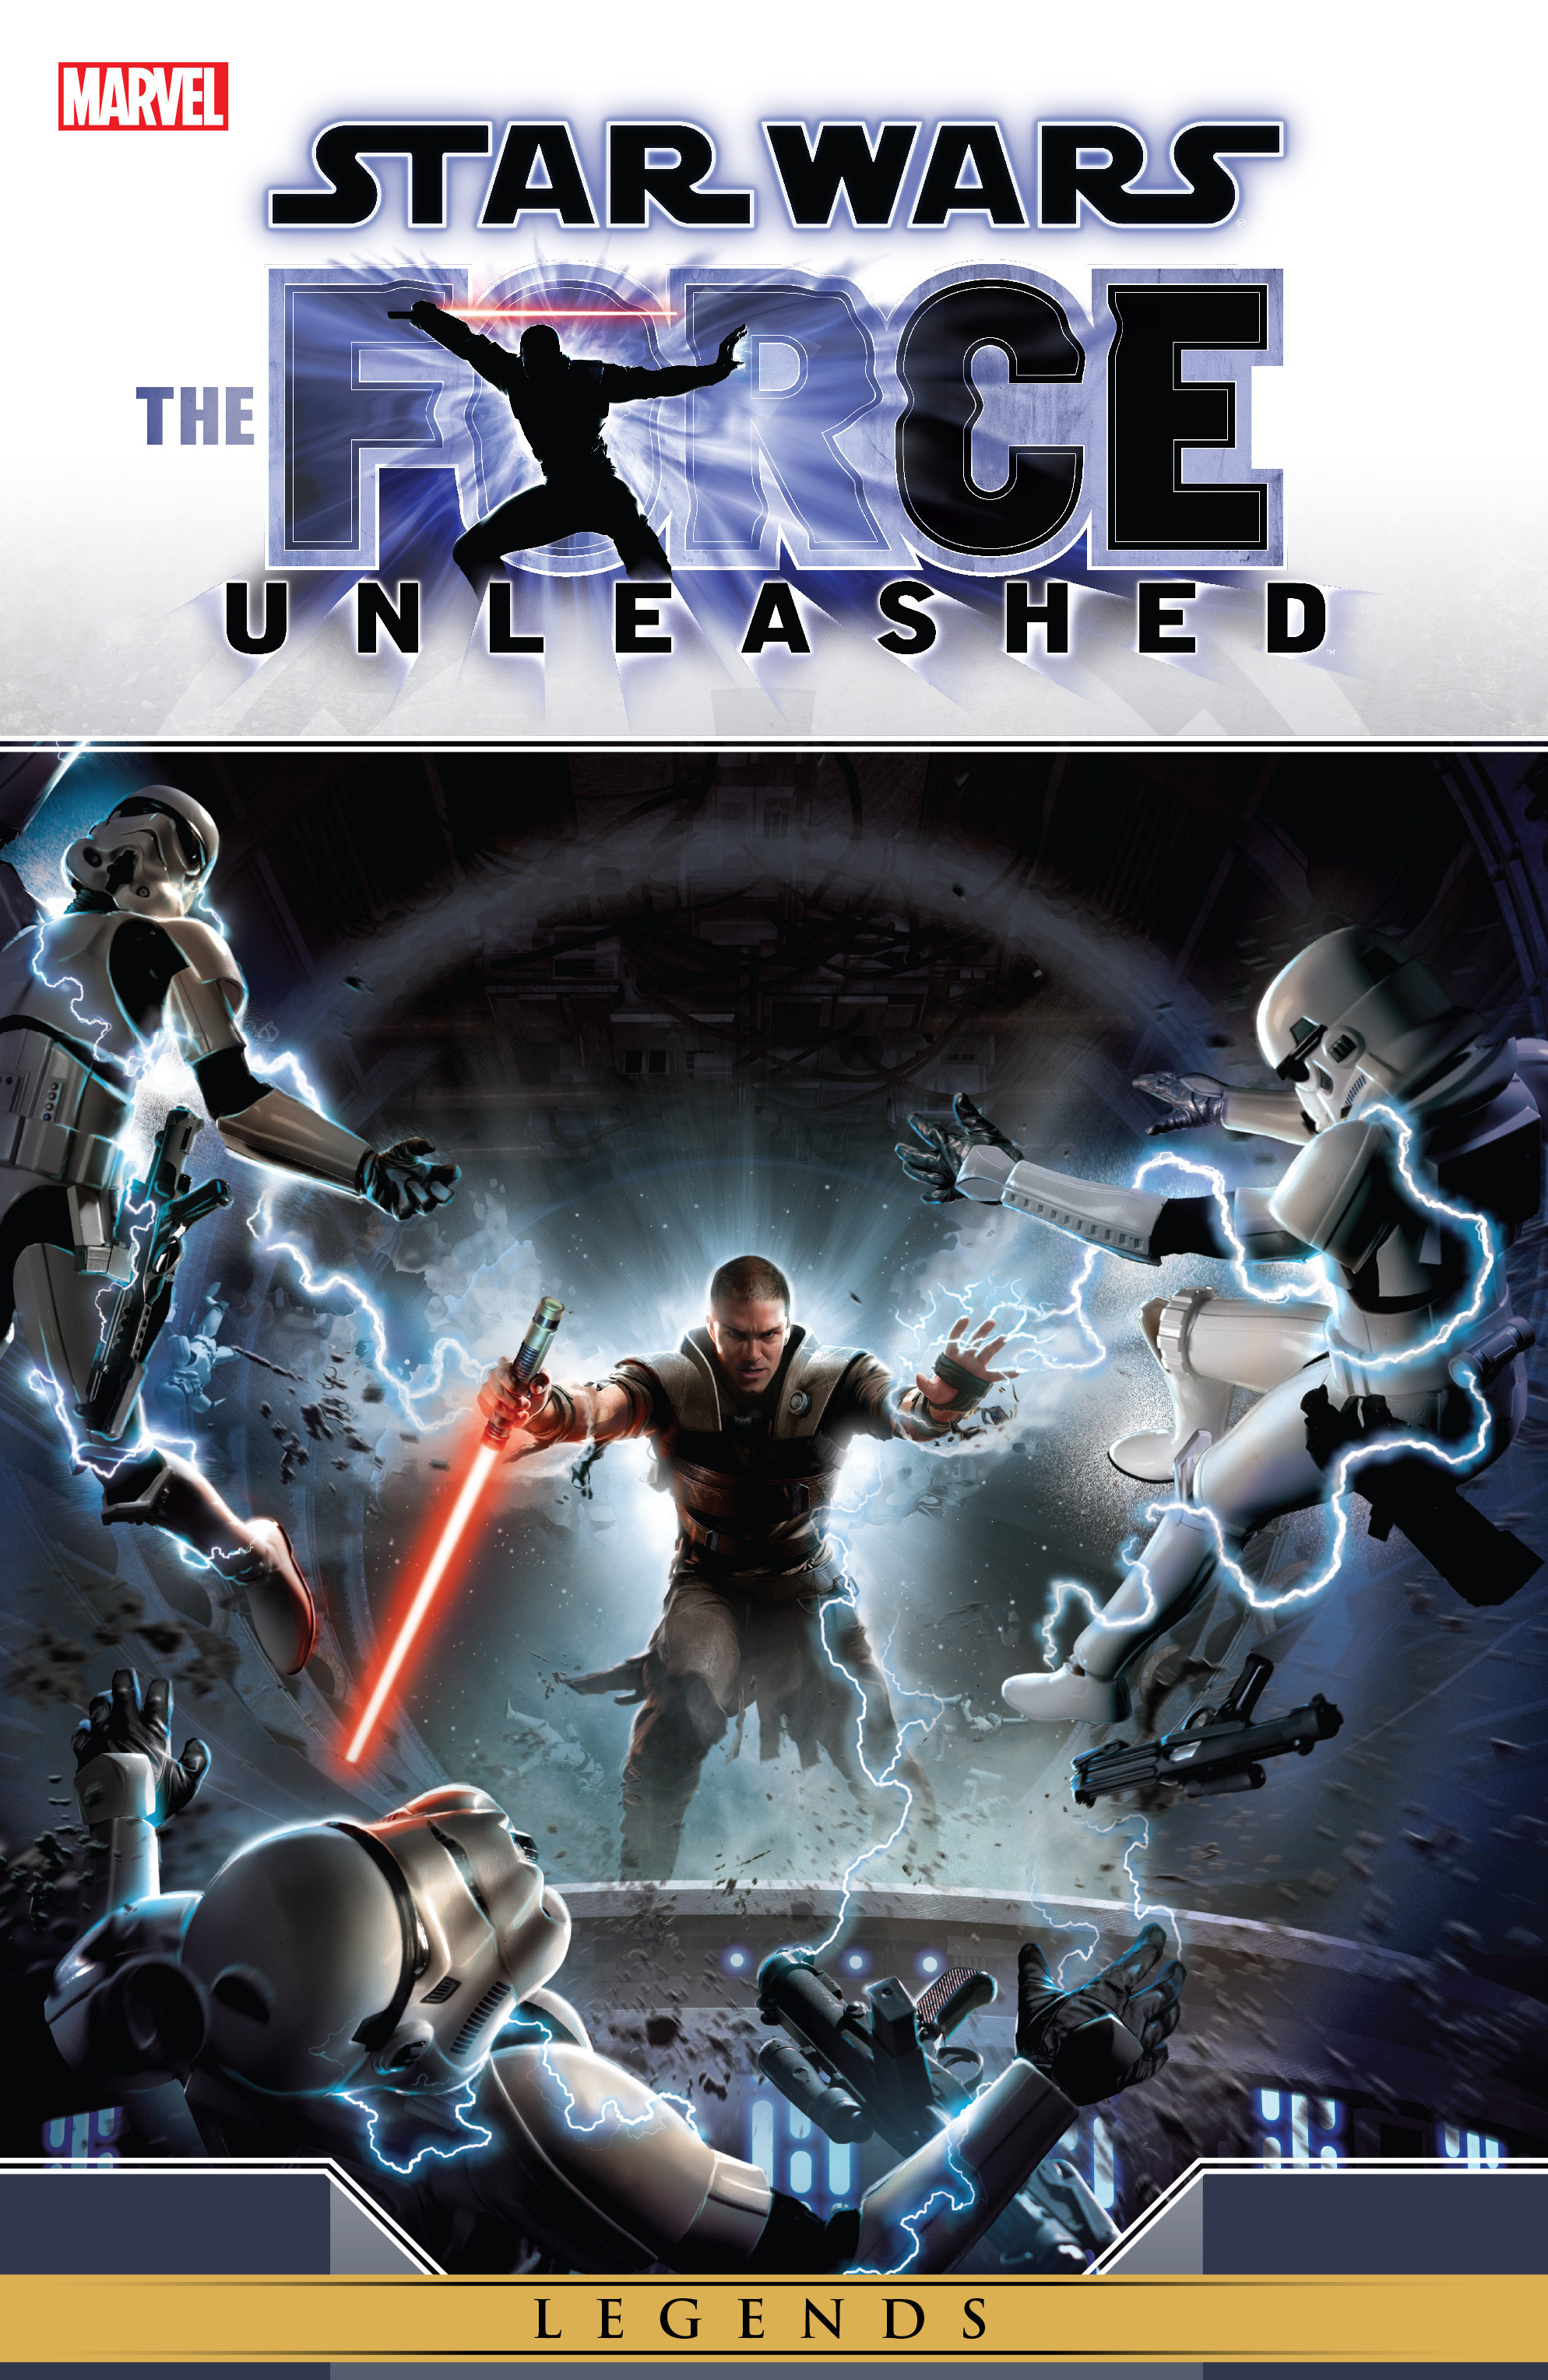 Read online Star Wars: The Force Unleashed comic -  Issue # Full - 1